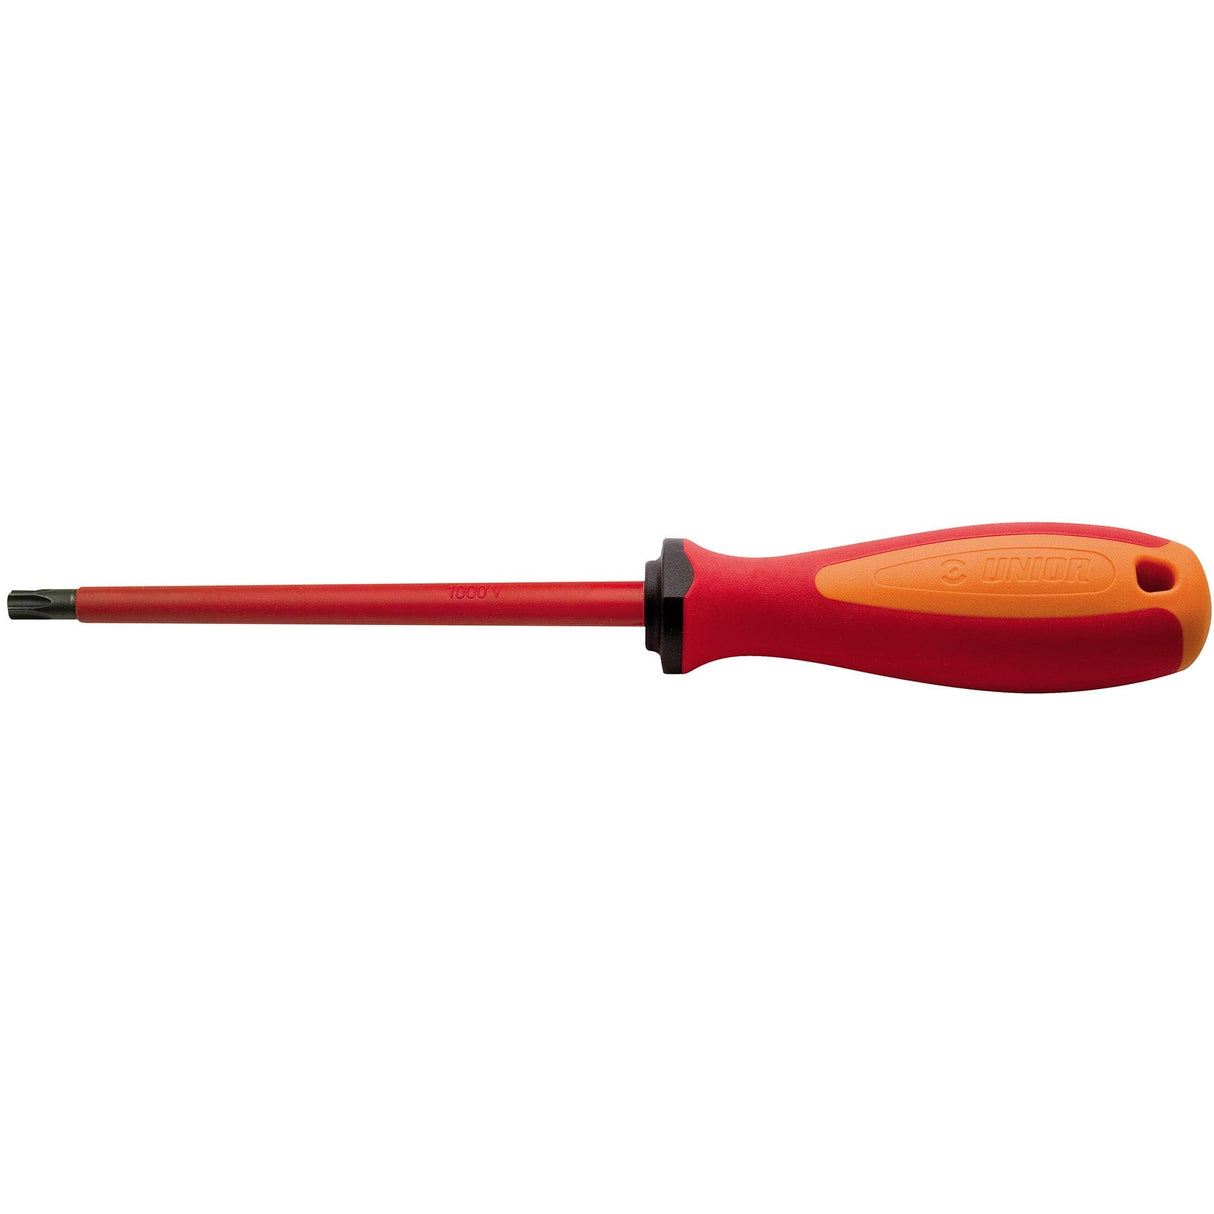 Unior Screwdriver Tbi With Tx Profile And Hole: Red Tr 30